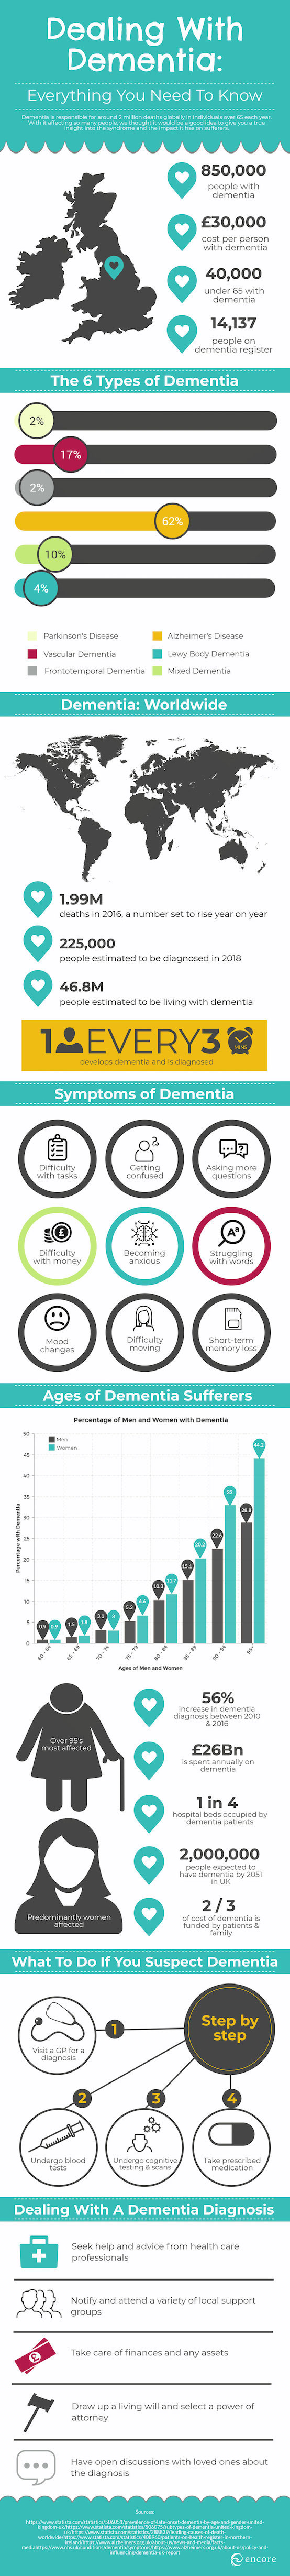 https://encorecarehomes.co.uk/dealing-with-dementia-infographic/